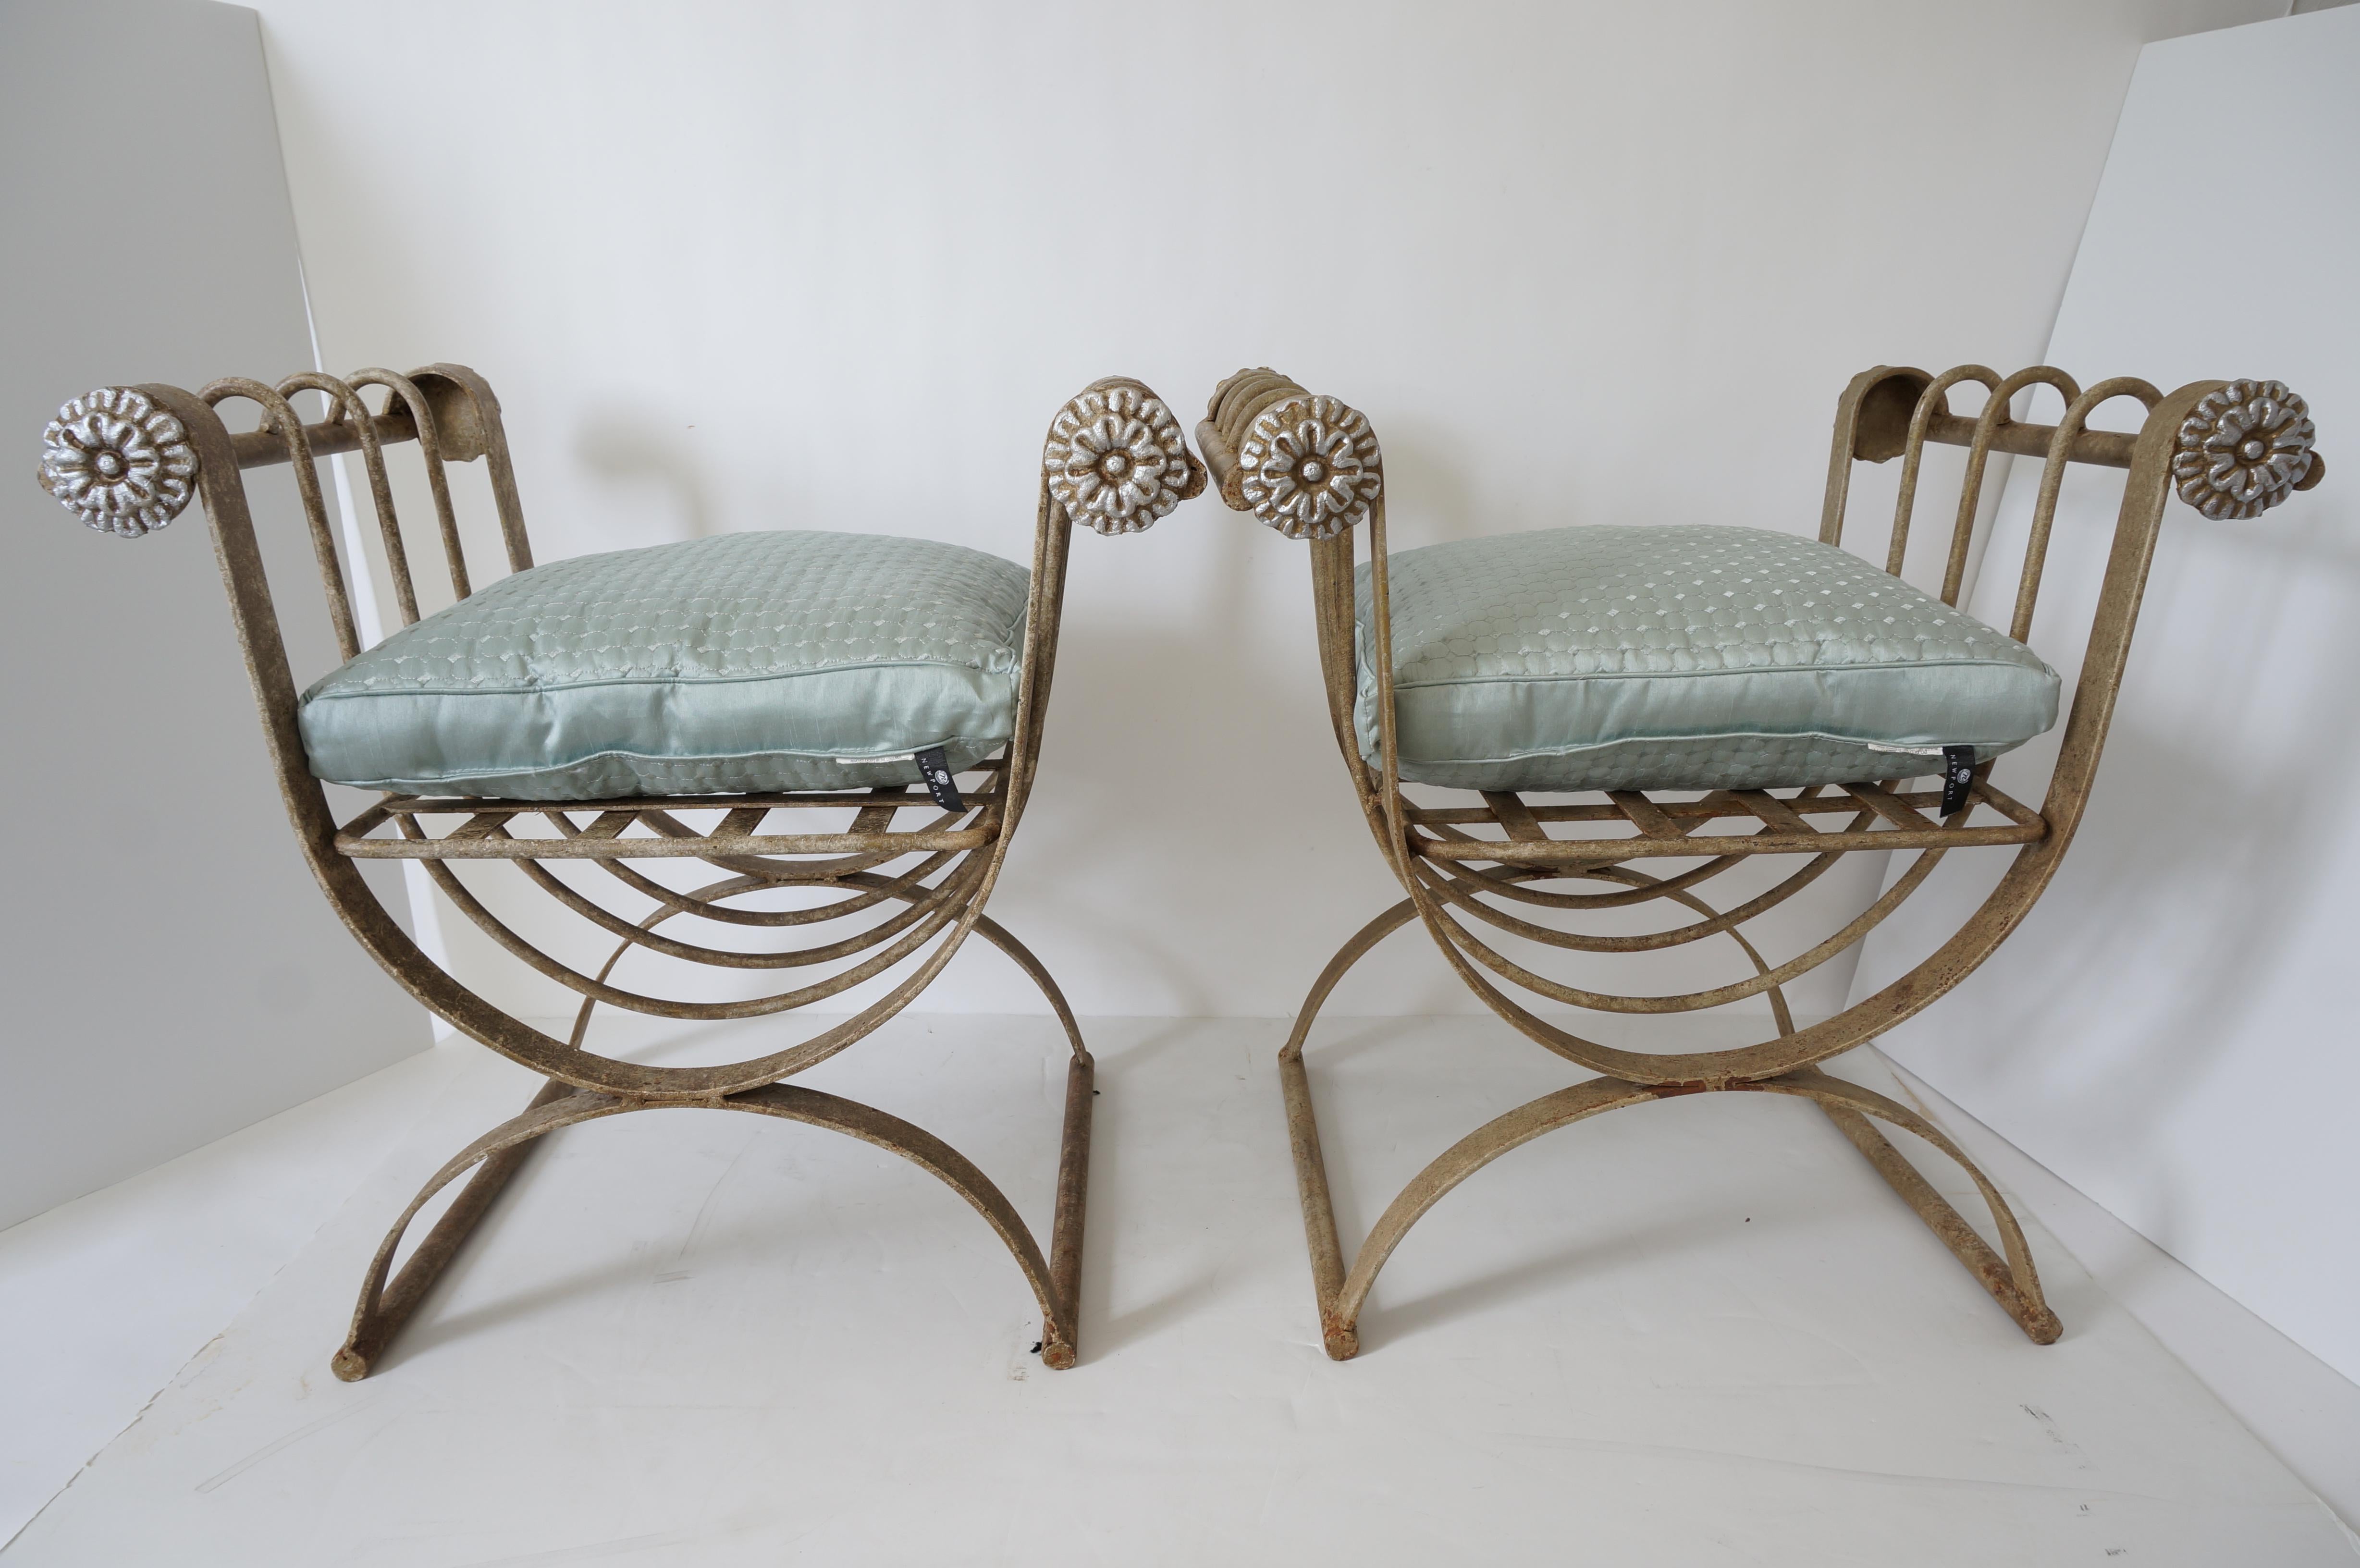 Woven Pair of Curule Form Benches